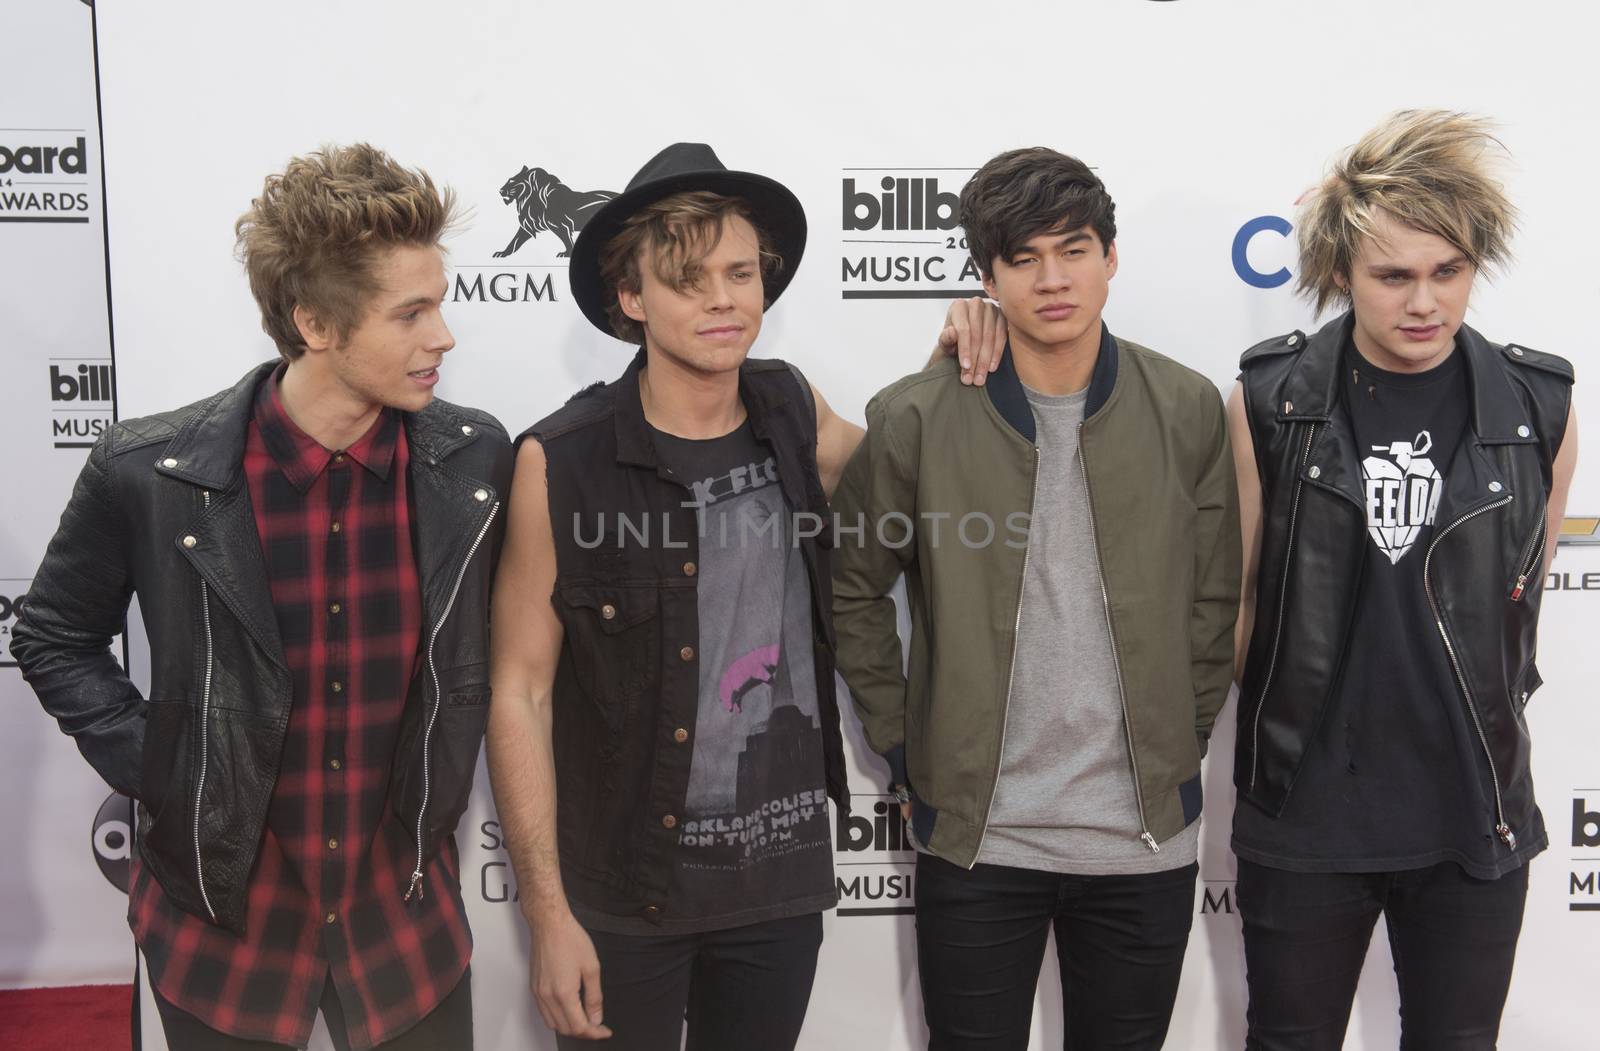 LAS VEGAS - MAY 18 : Members of the pop band 5 Seconds of Summer attend the 2014 Billboard Music Awards at the MGM Grand Garden Arena on May 18 , 2014 in Las Vegas.